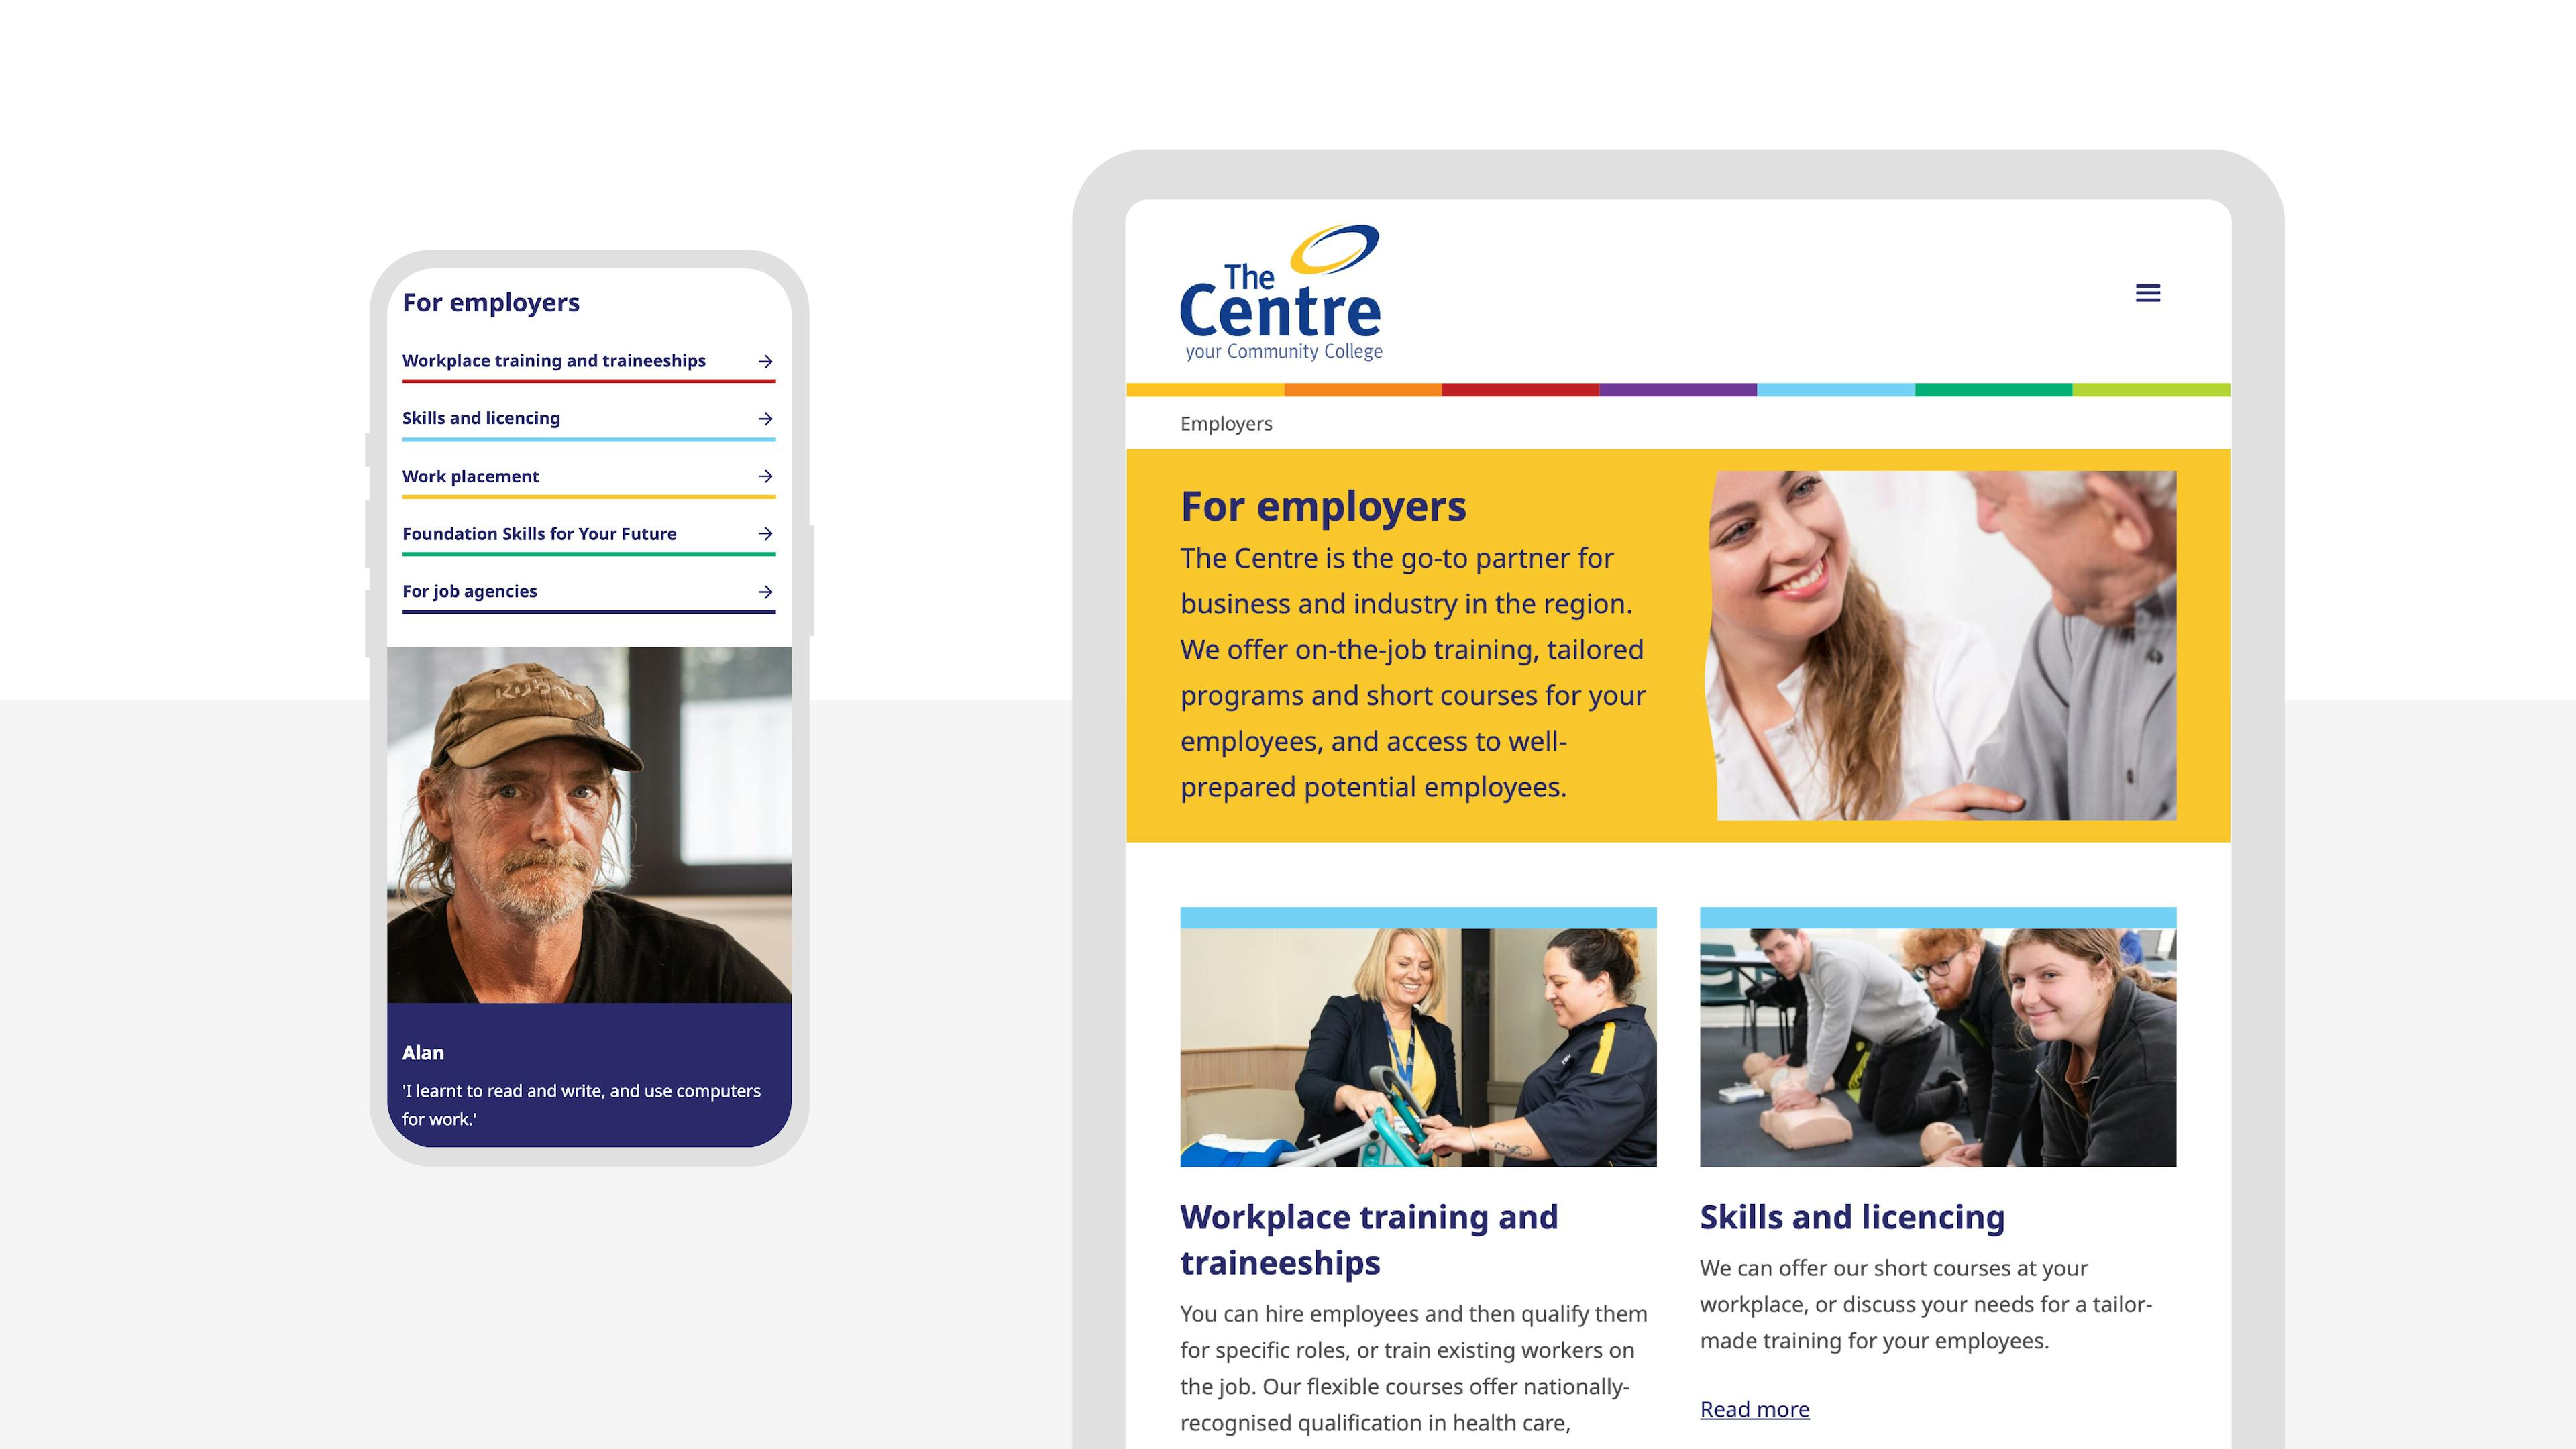 Quick links on the home page and the For employers page